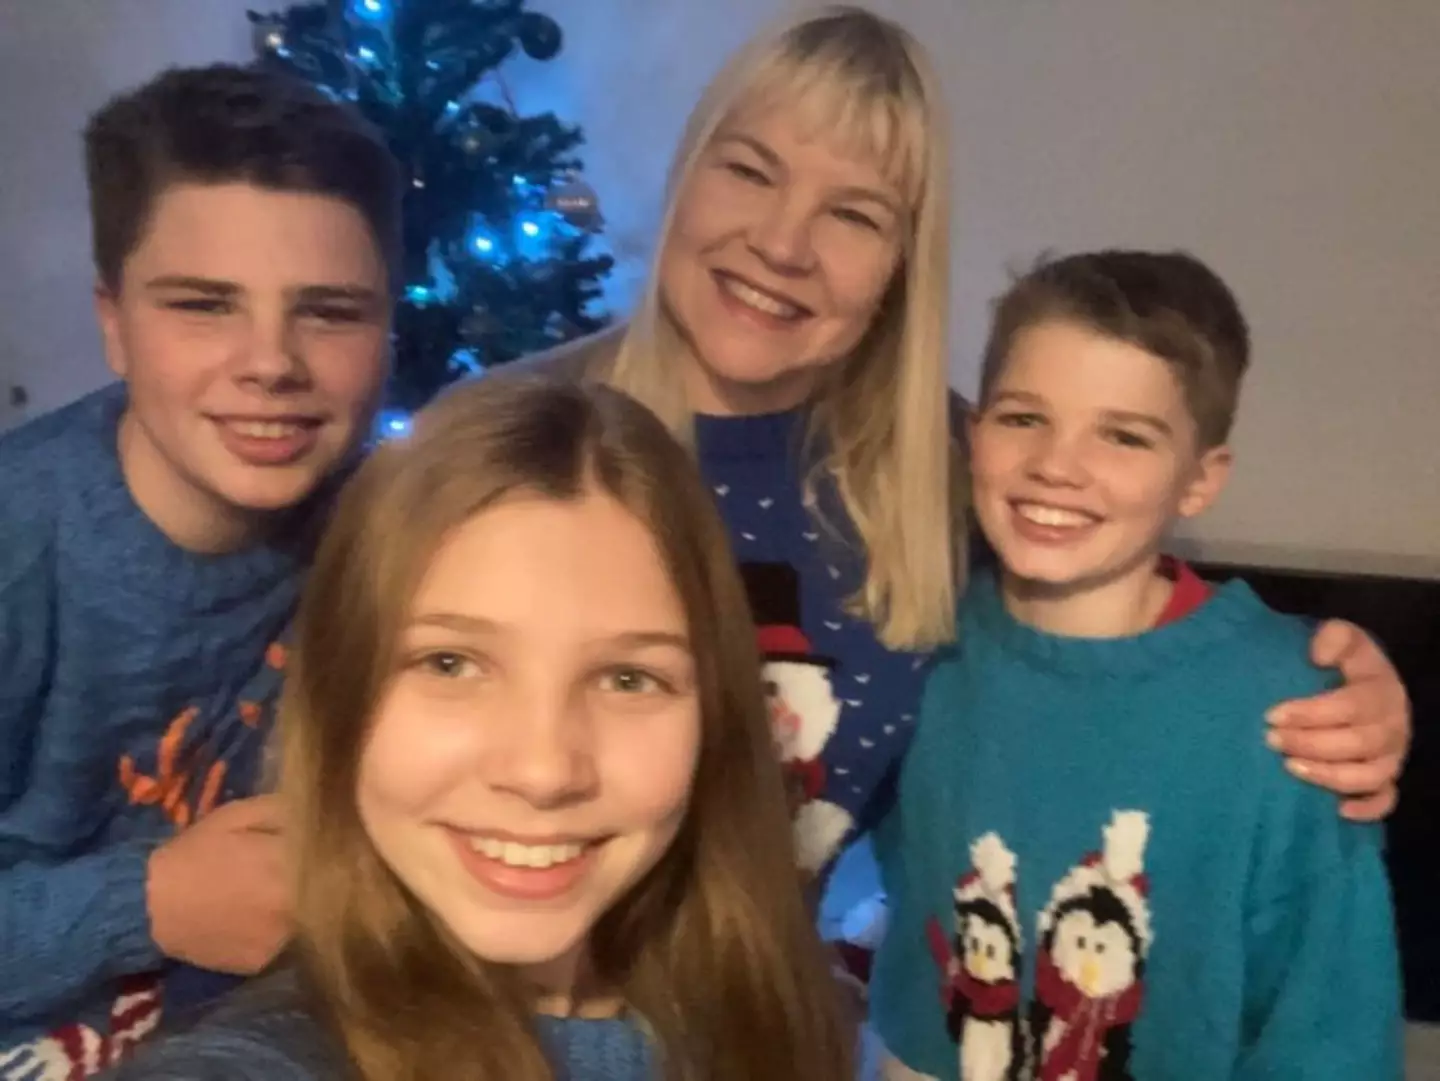 Louise says despite their money struggles the family is looking forward to Christmas.